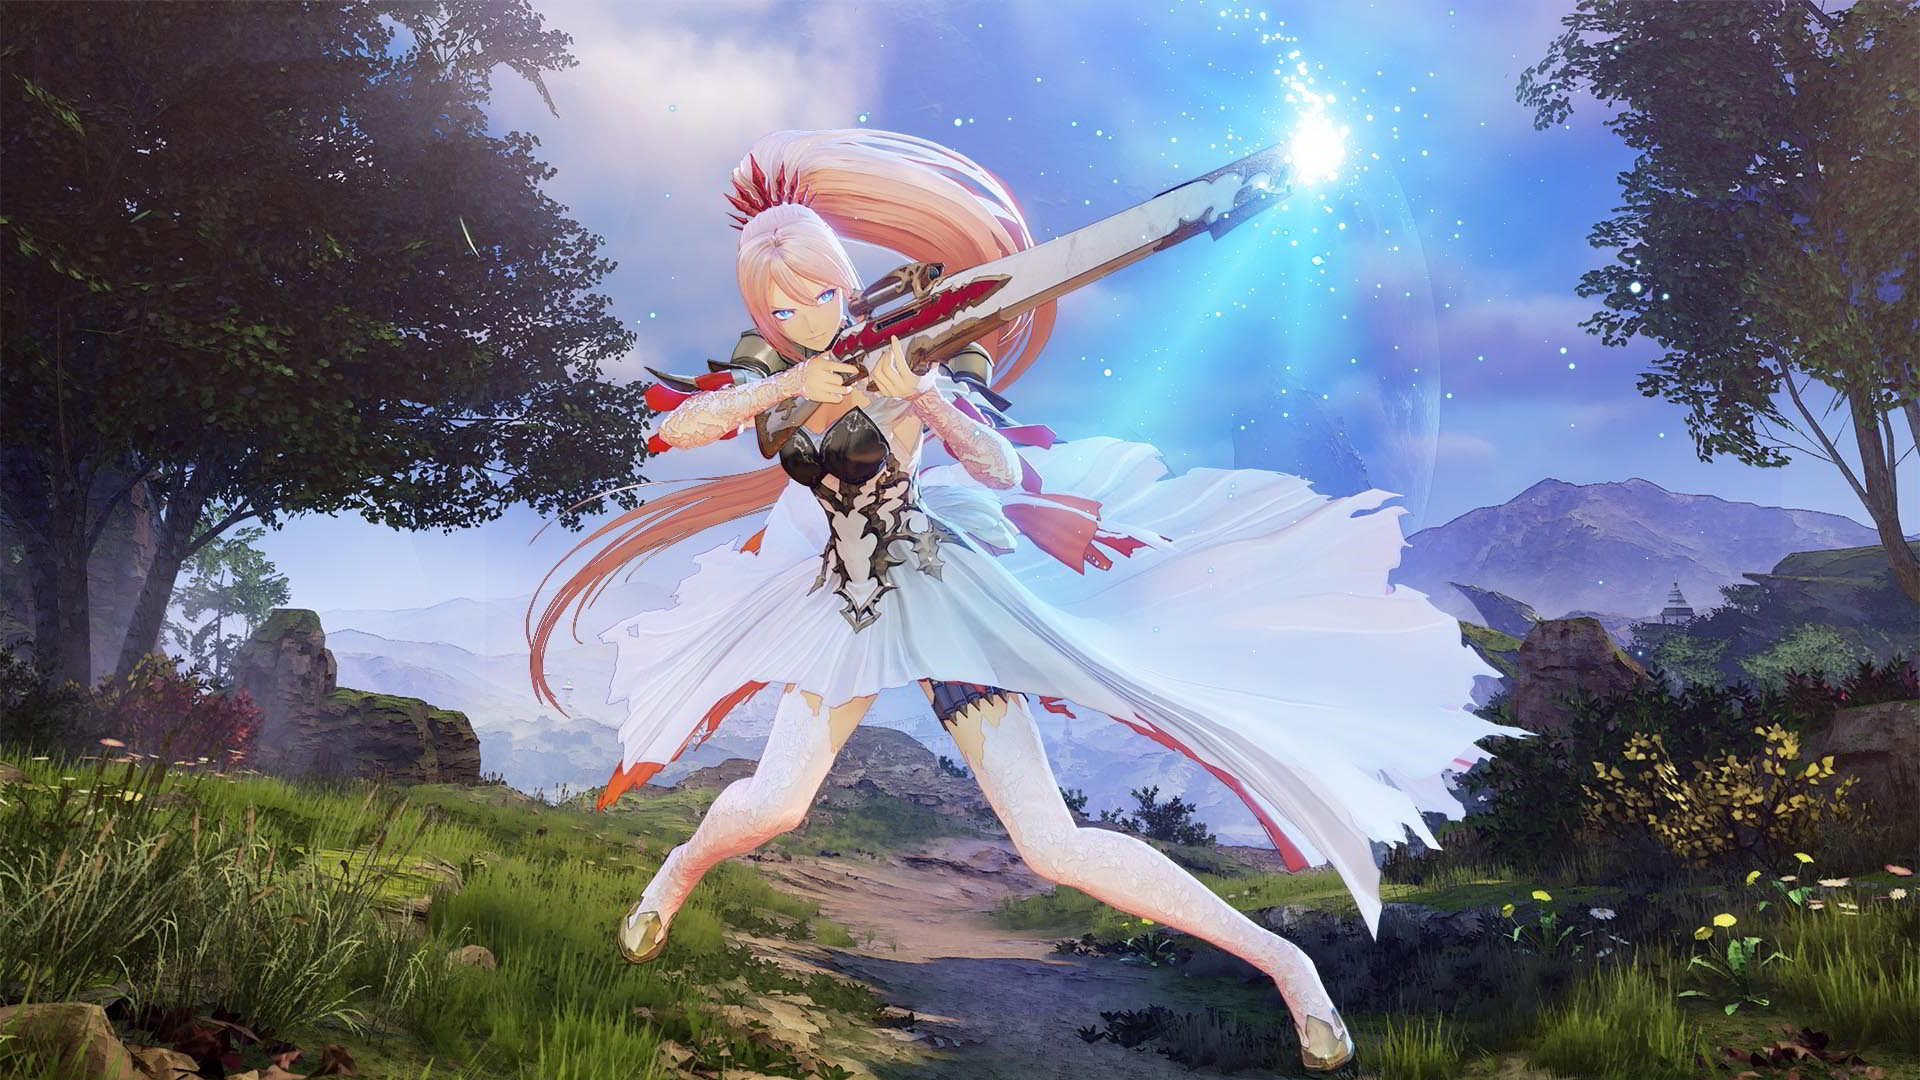 Tales of arise steam